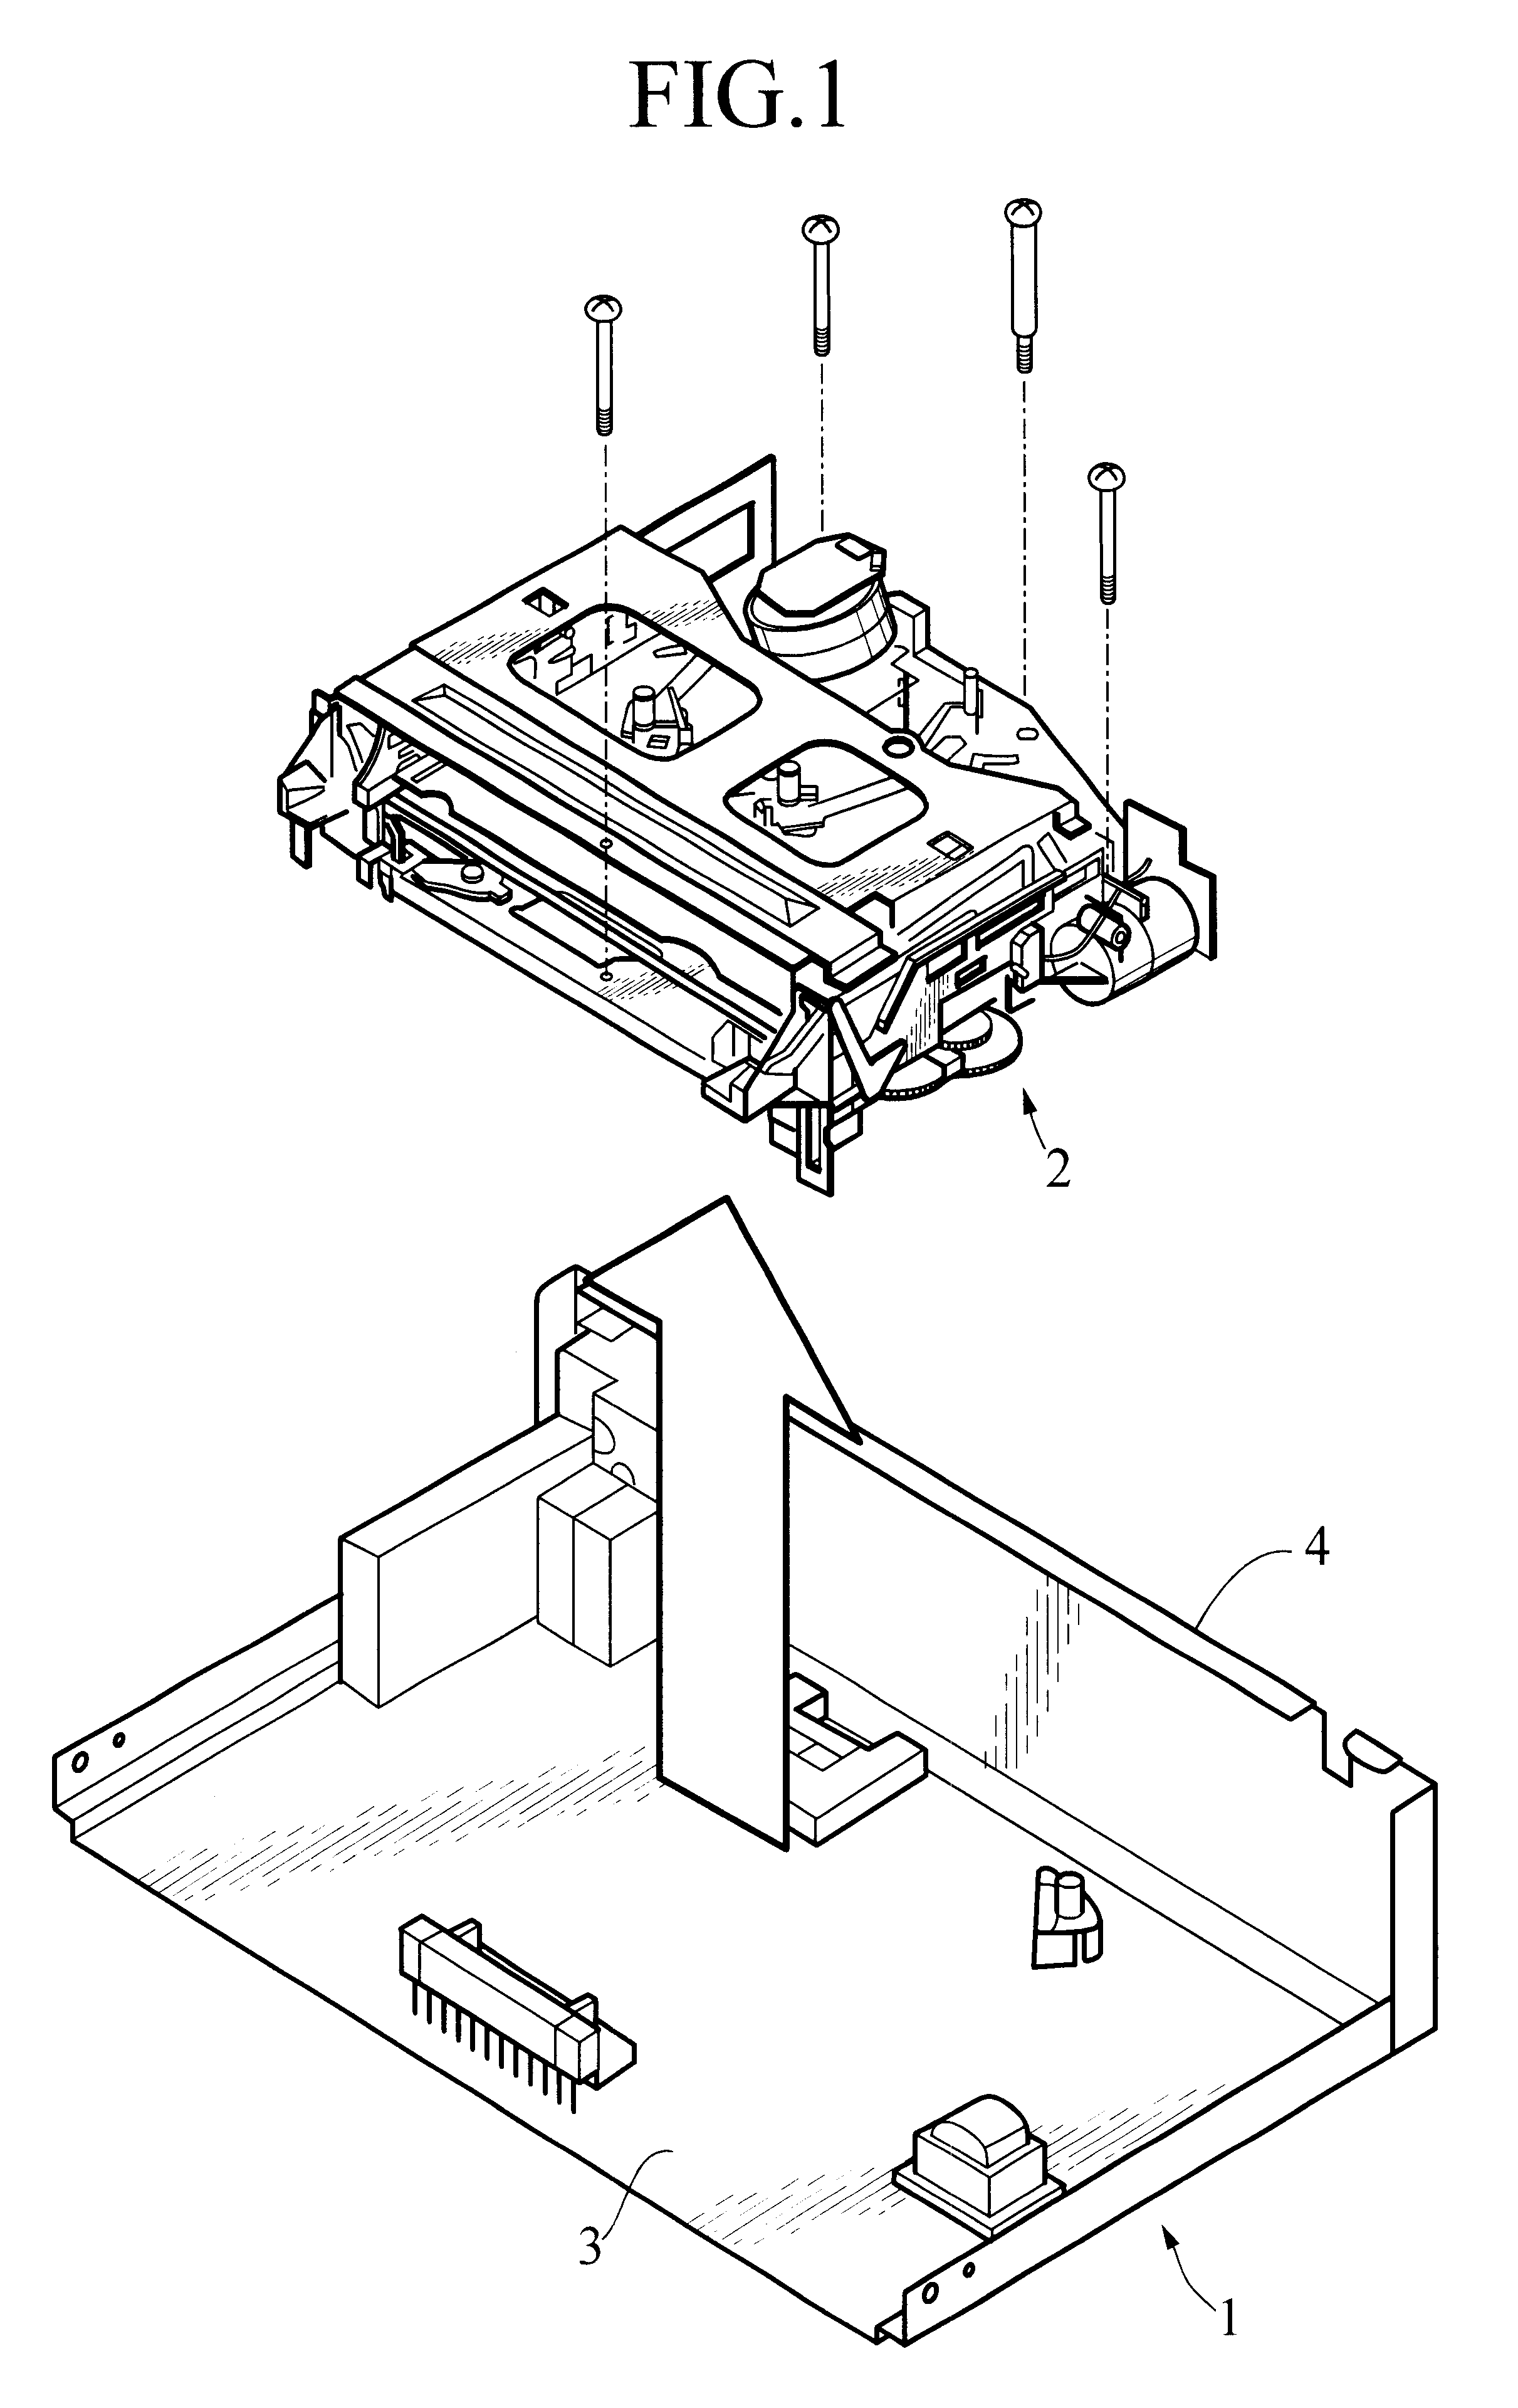 Cabinet structure for a magnetic tape recorder